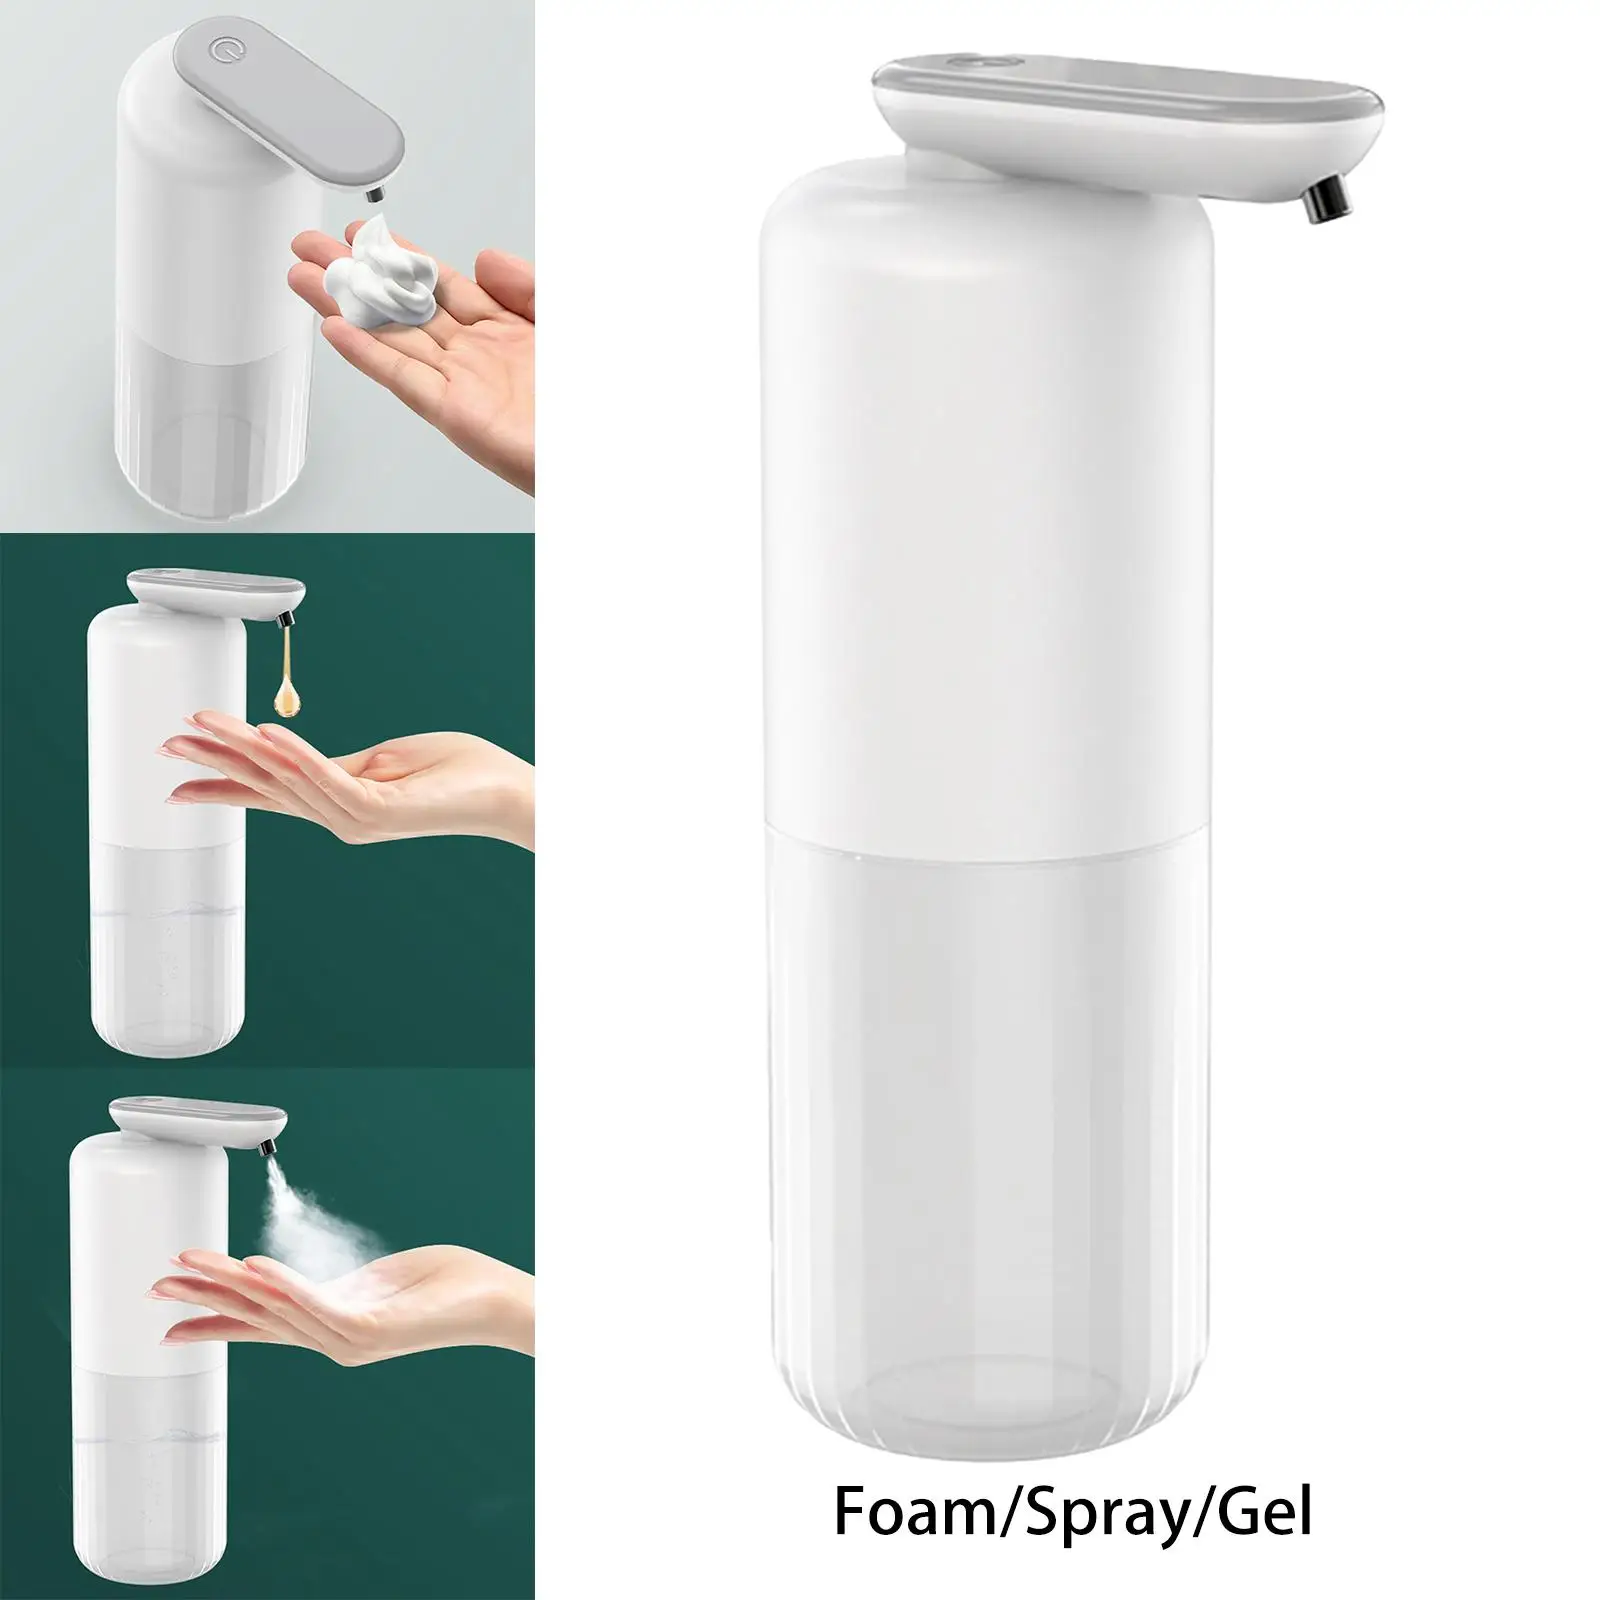 Touchless Automatic Soap Dispenser Adjustable Volume 350ml for Kitchen